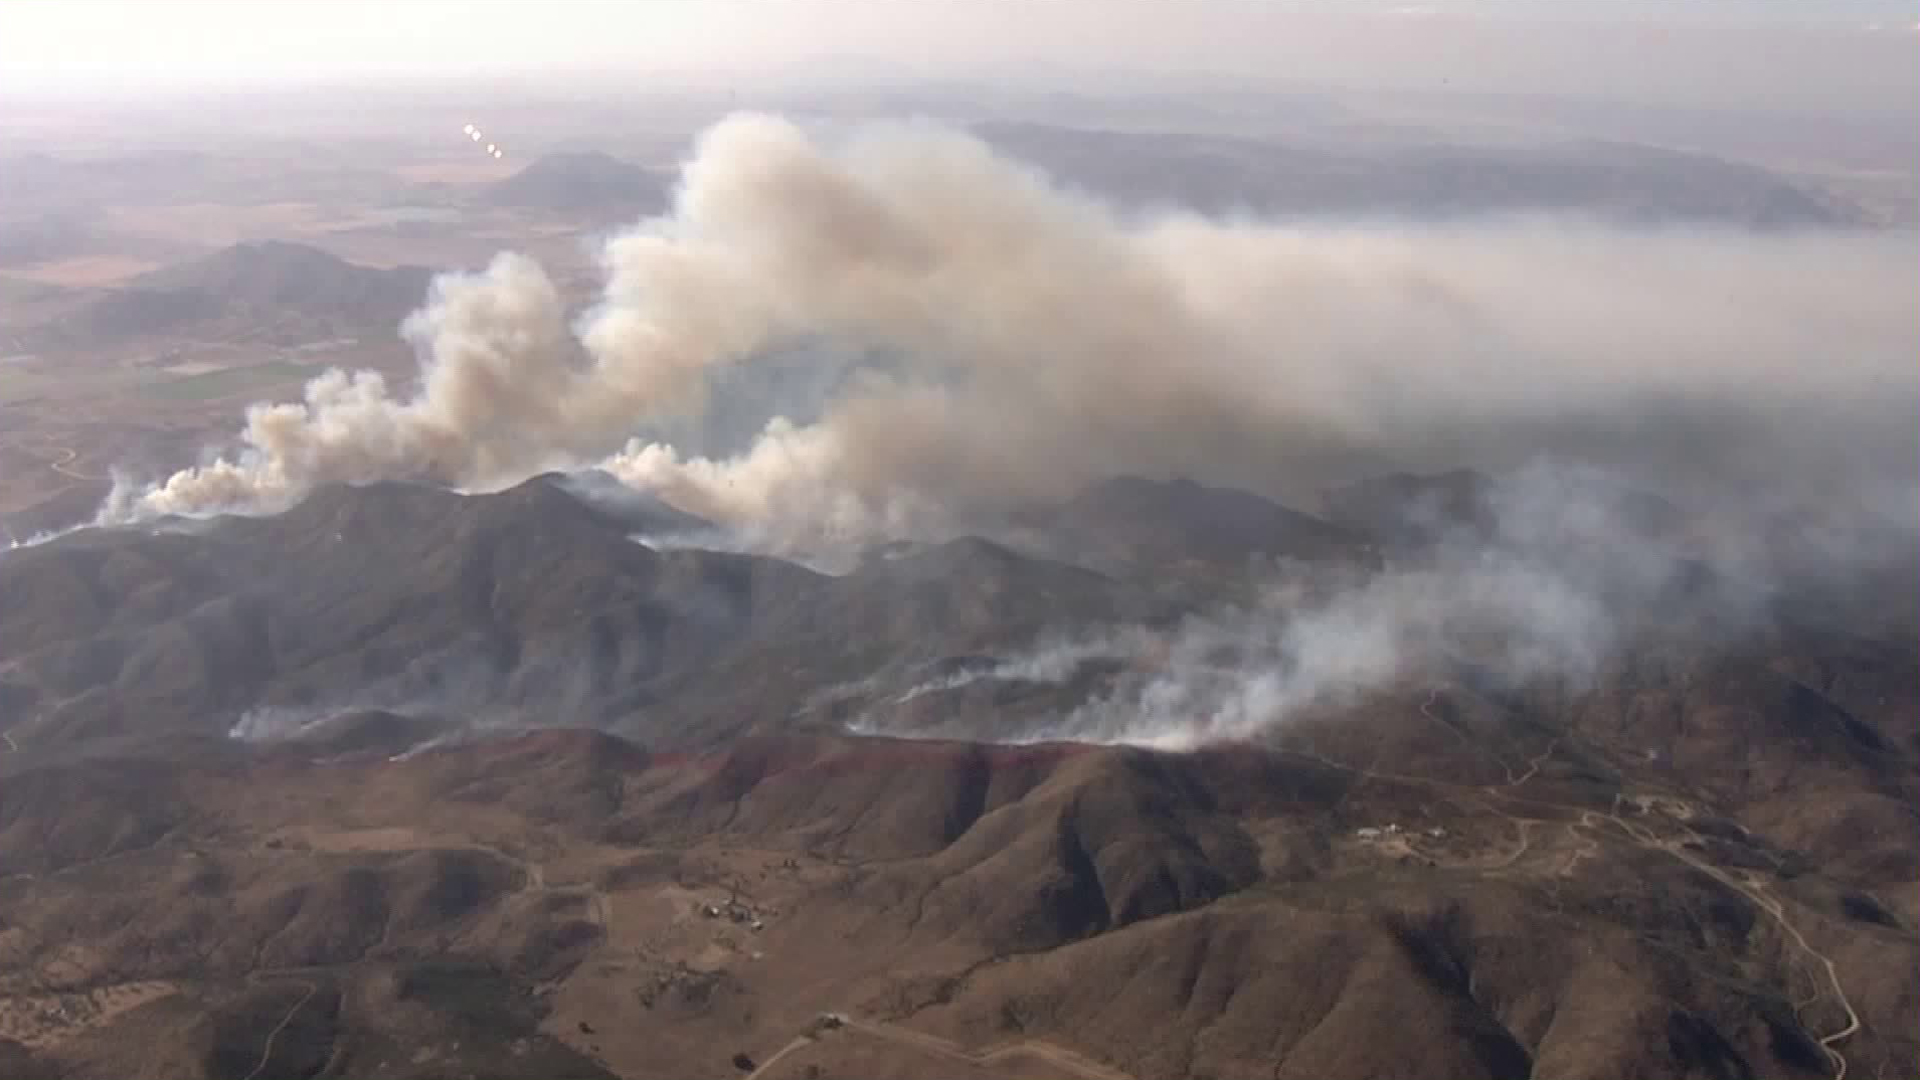 A brush fire grew to 300 acres after breaking out in Riverside County, near Hemet, on May 17, 2018. (Credit: KTLA)